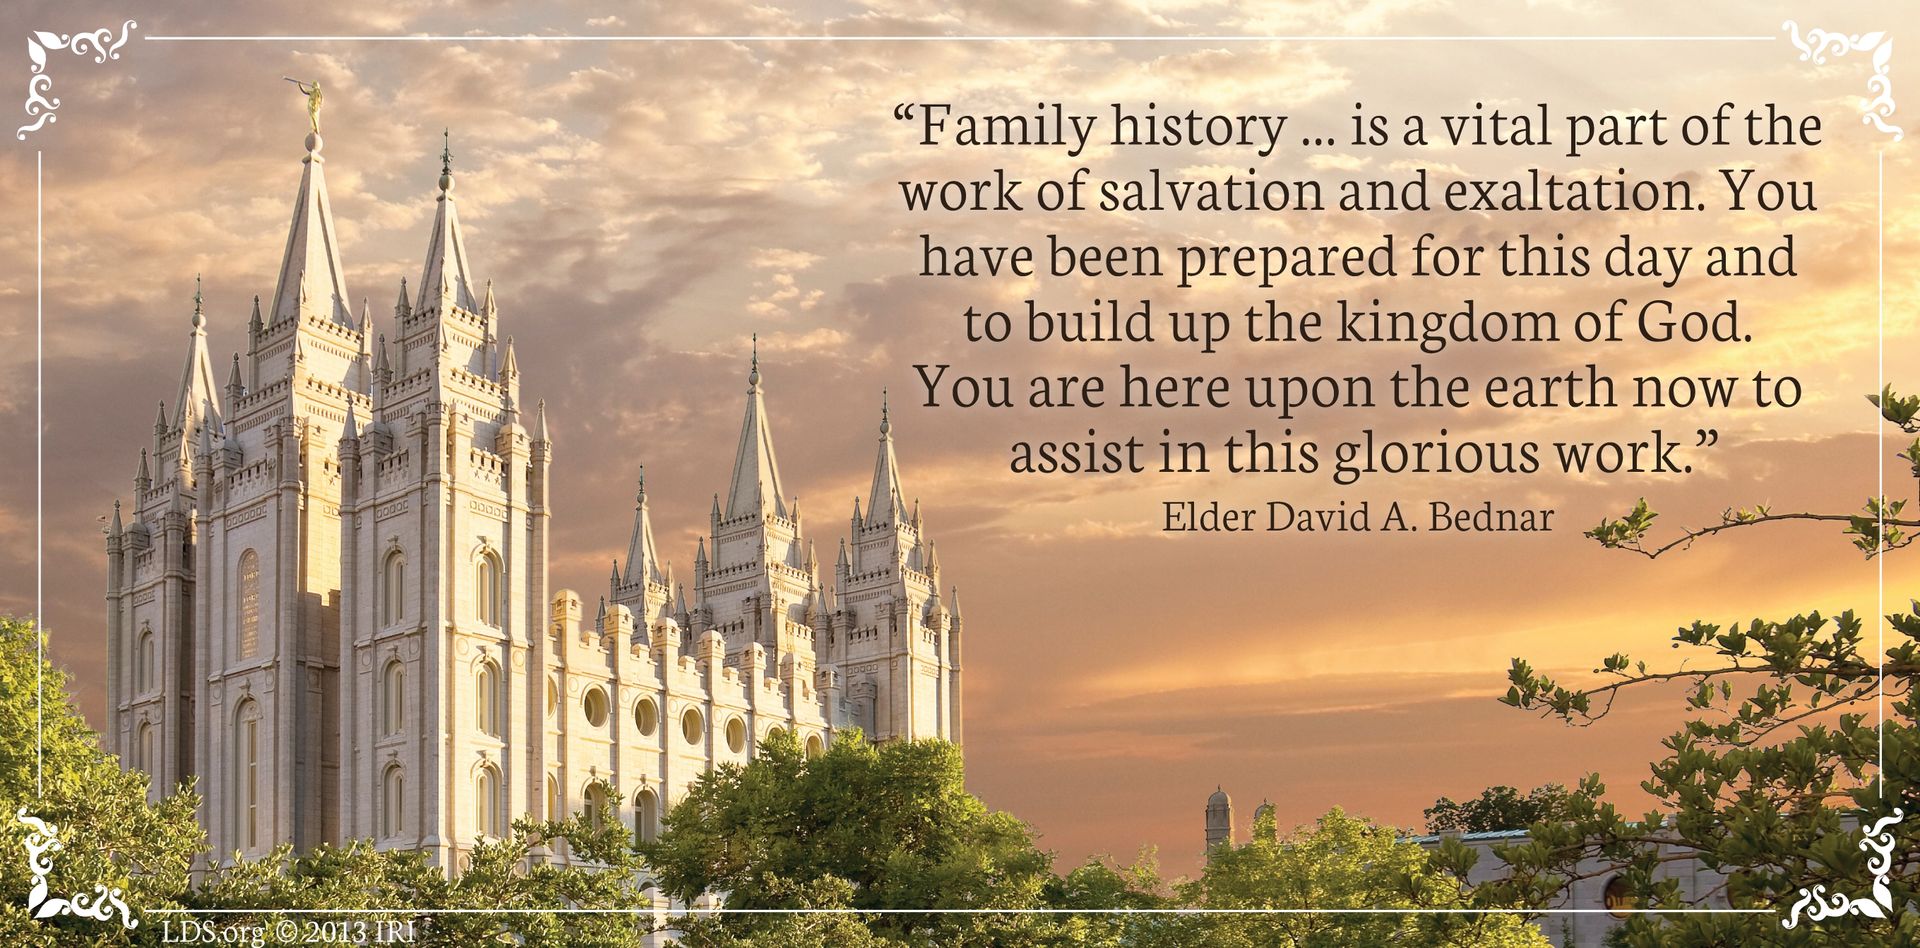 “Family history … is a vital part of the work of salvation and exaltation. You have been prepared for this day and to build up the kingdom of God. You are here upon the earth now to assist in this glorious work.”—Elder David A. Bednar, “The Hearts of the Children Shall Turn” © undefined ipCode 1.